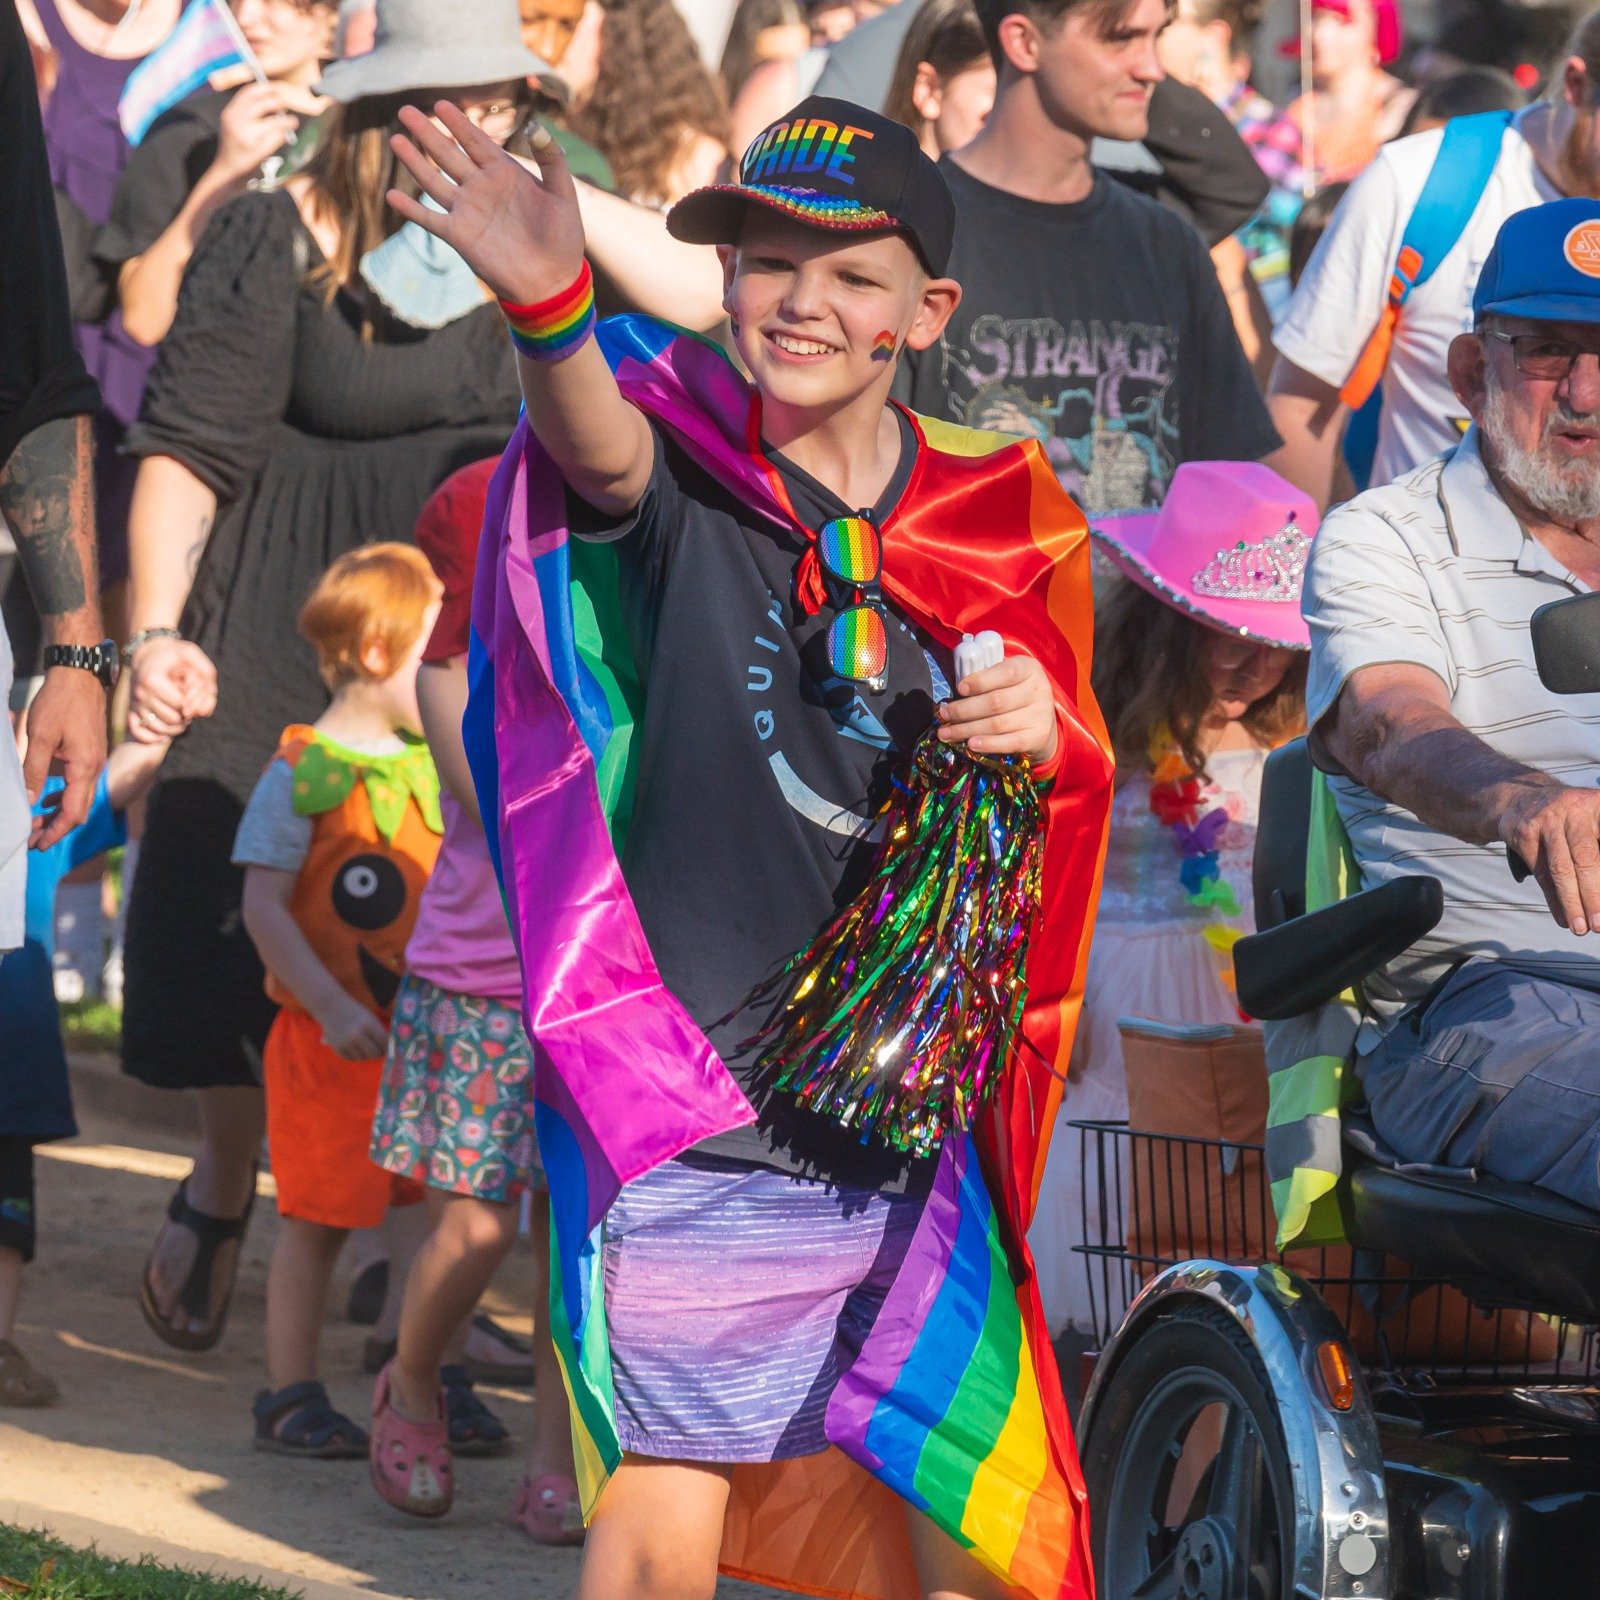 Wagga Mardi Gras vibes are unmatched! Your fabulous outfits always make the celebration even brighter. 🤩🌈

#waggamardigras #lgbt #gay #lgbtq #pride #lesbian #loveislove #queer #instagay #bisexual #transgender #trans #gaypride #dragqueen #lgbtpride 